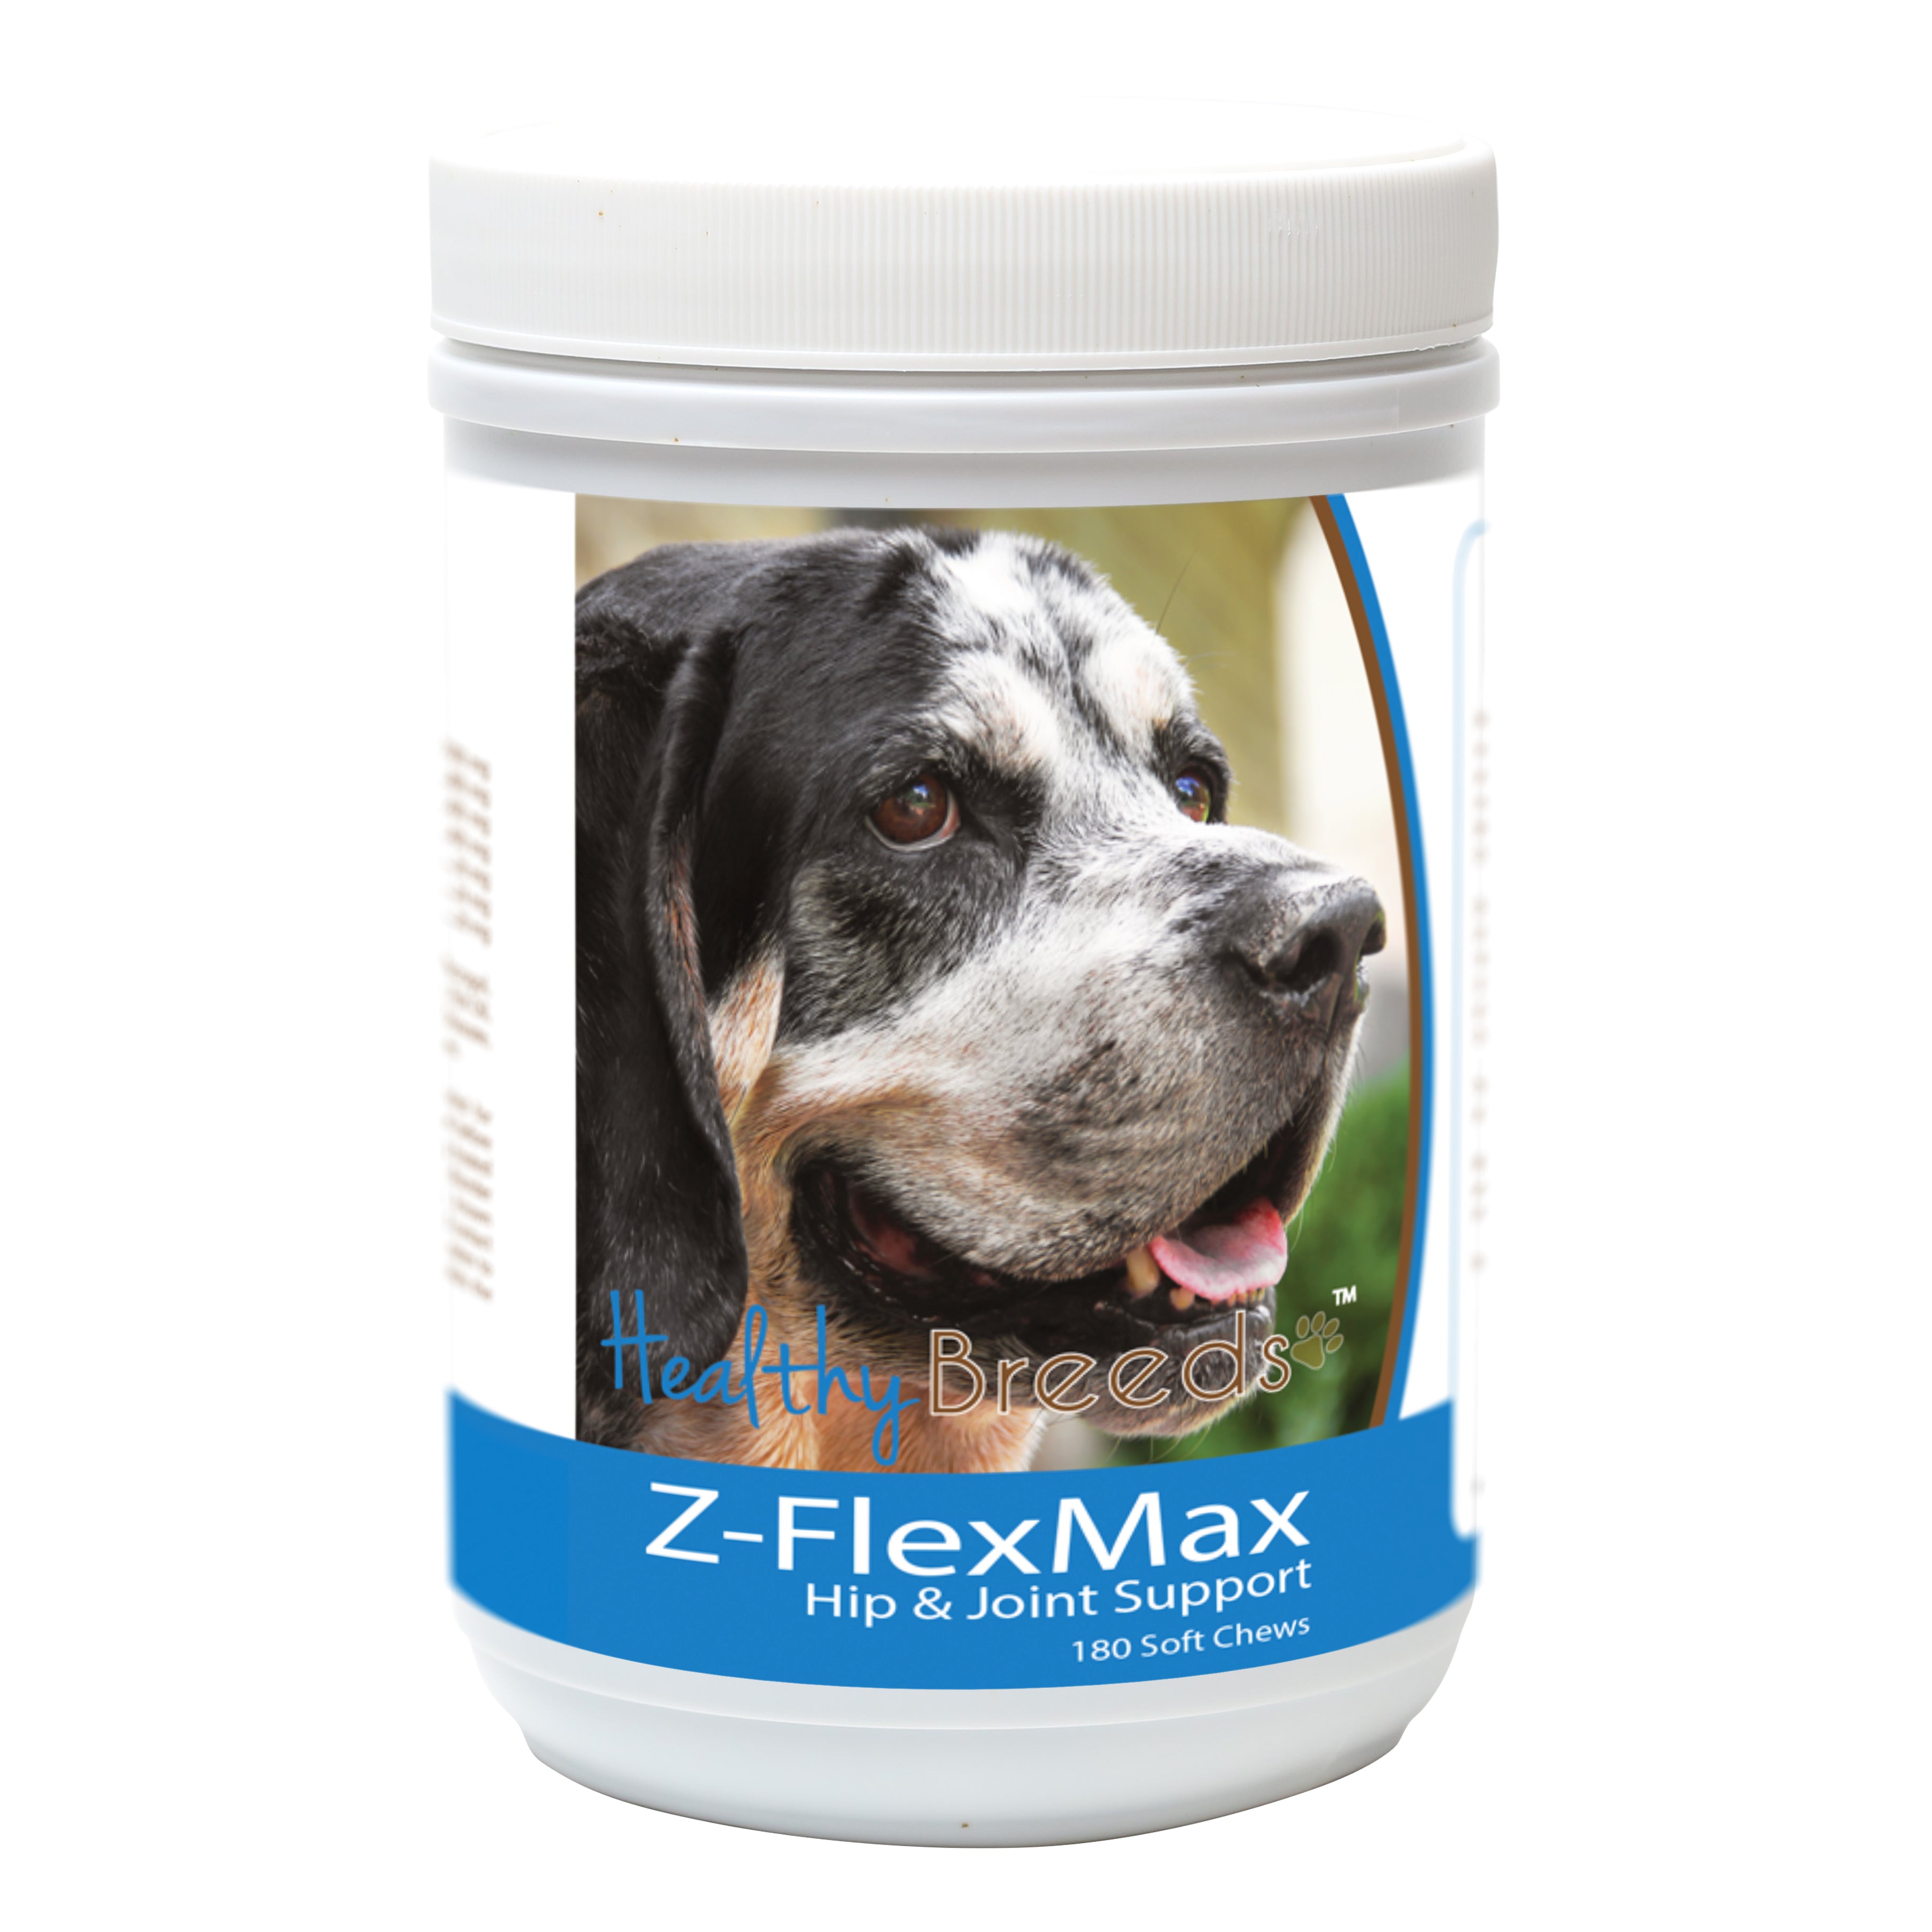 Bluetick Coonhound Z-Flex Max Dog Hip and Joint Support 180 Count